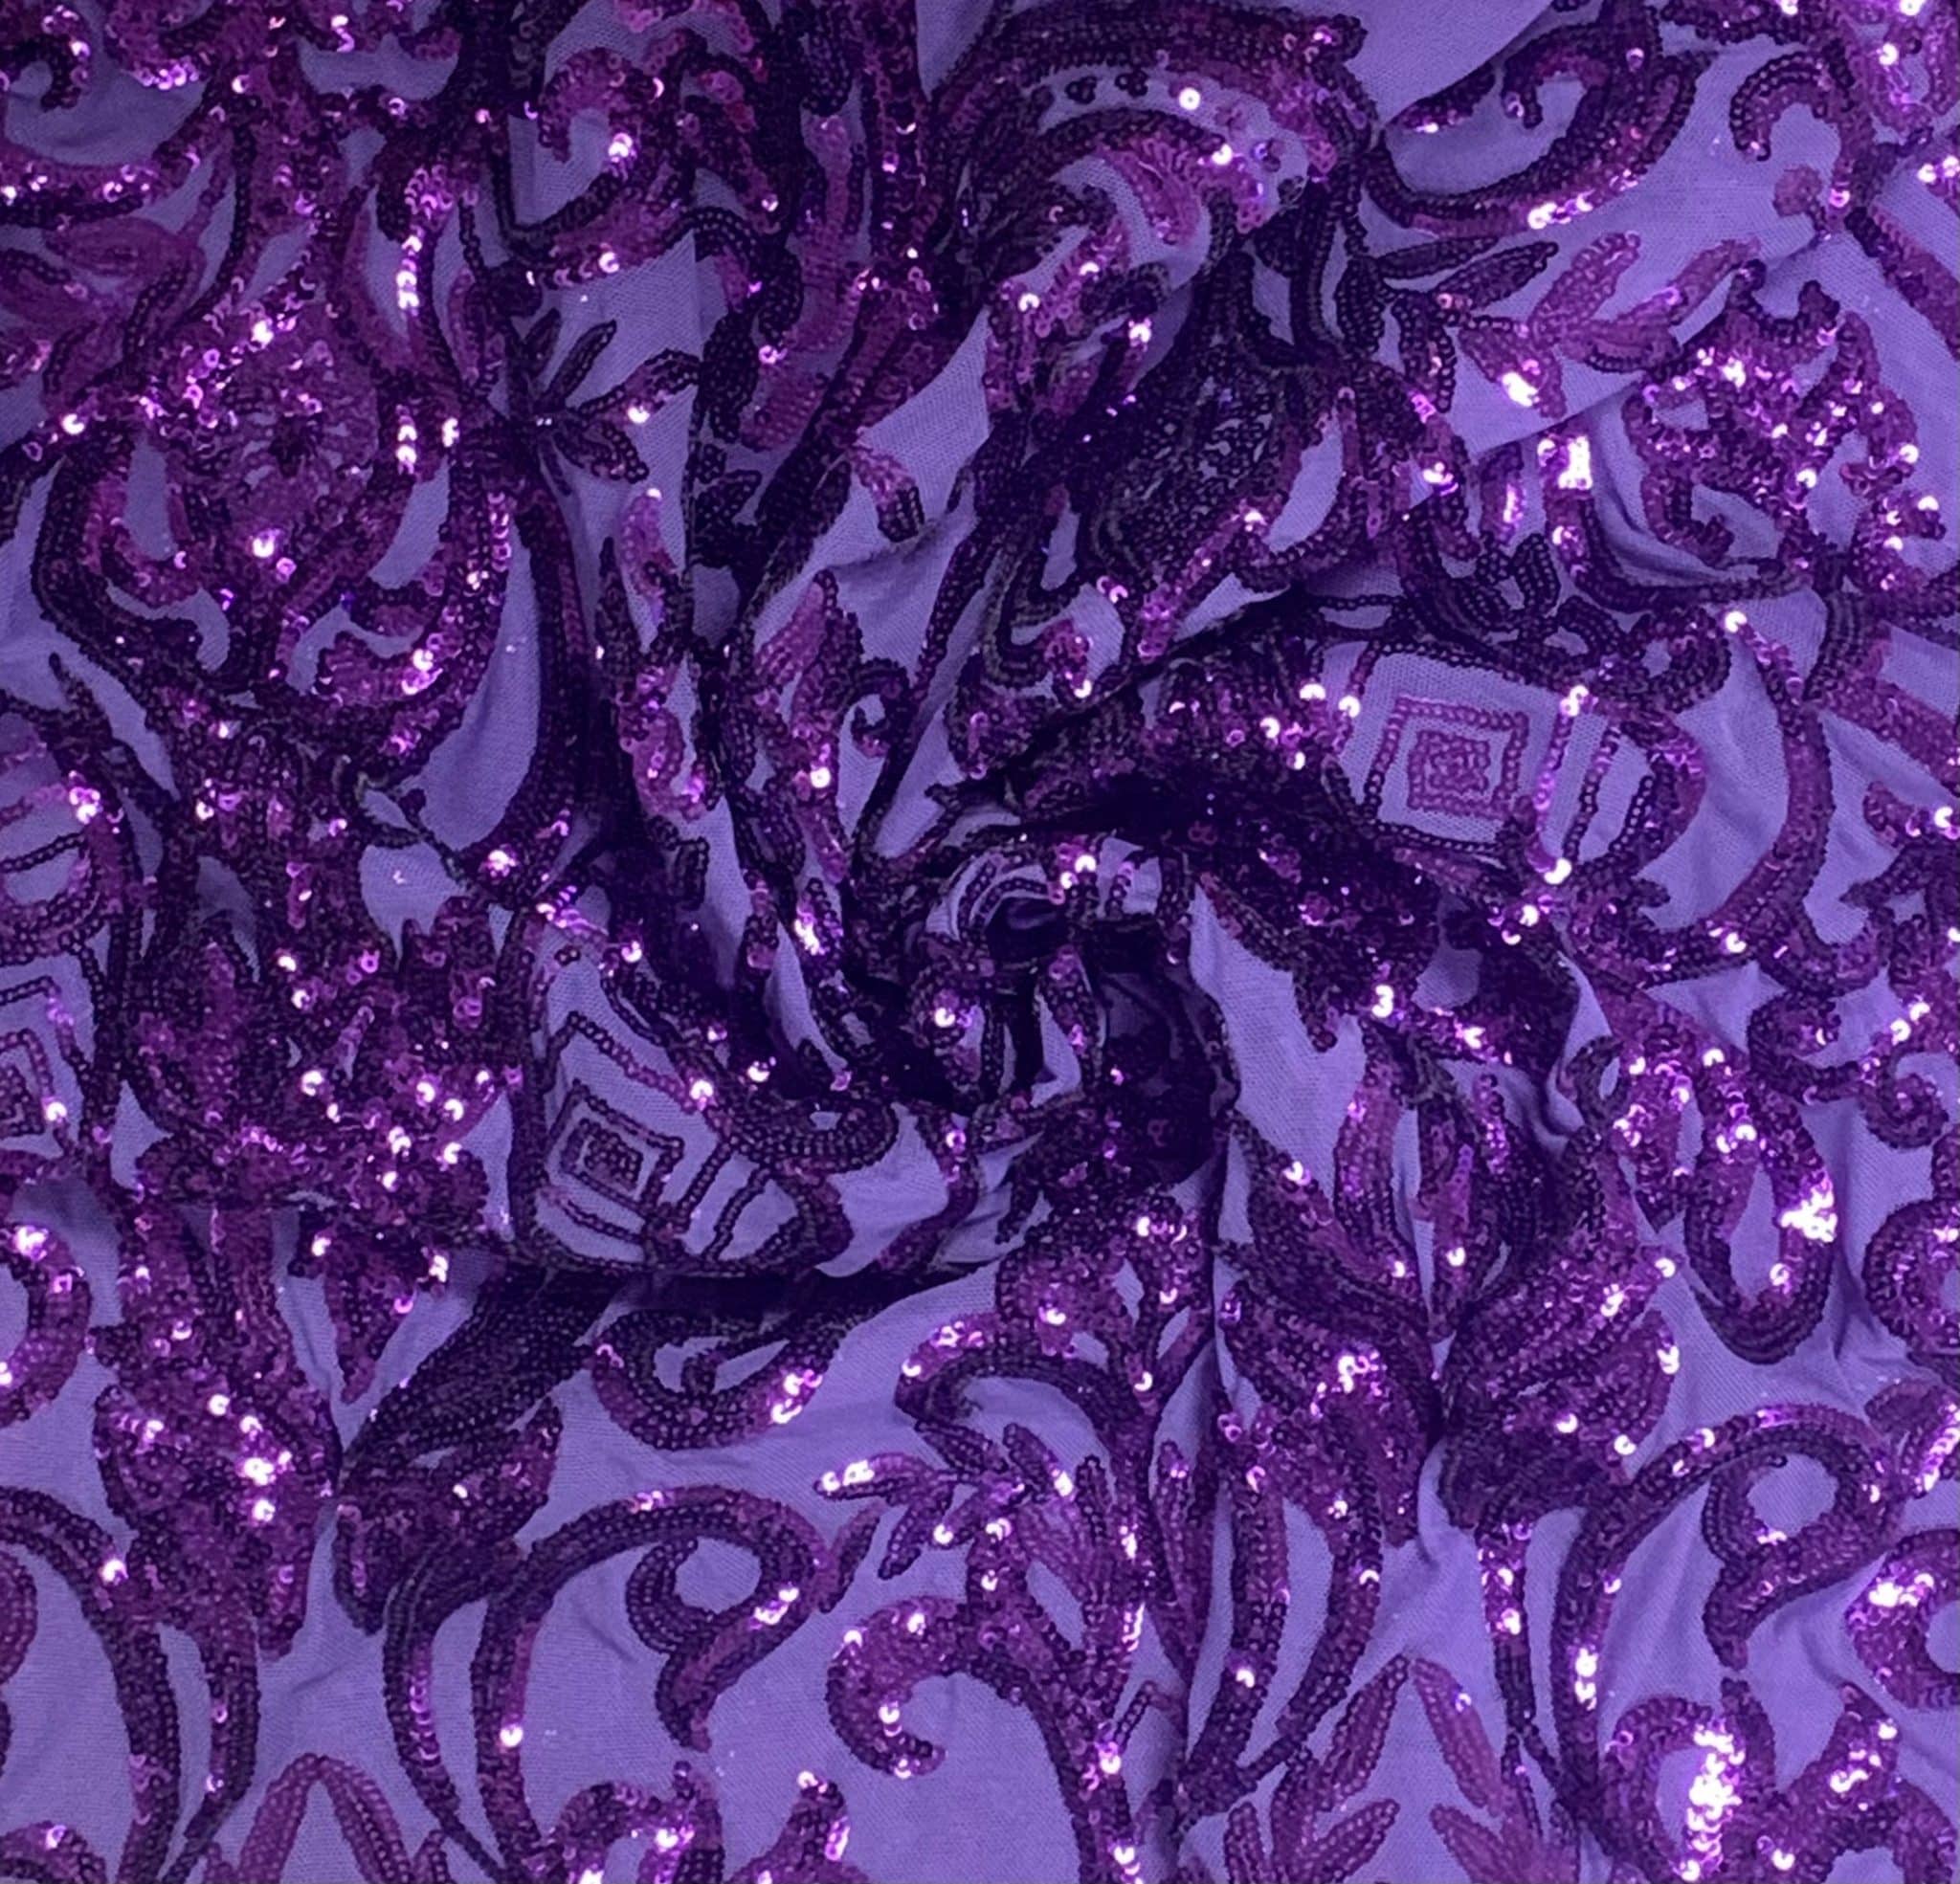 Lycra Parisot with Sequin Fabric Glitter Fabric The Yard Little Mermaid  Fabric Material Fabric Sparkly Fabric Mesh Fabric Vinyl Fabric Sequence  Fabric Material - THE FLYING TREE